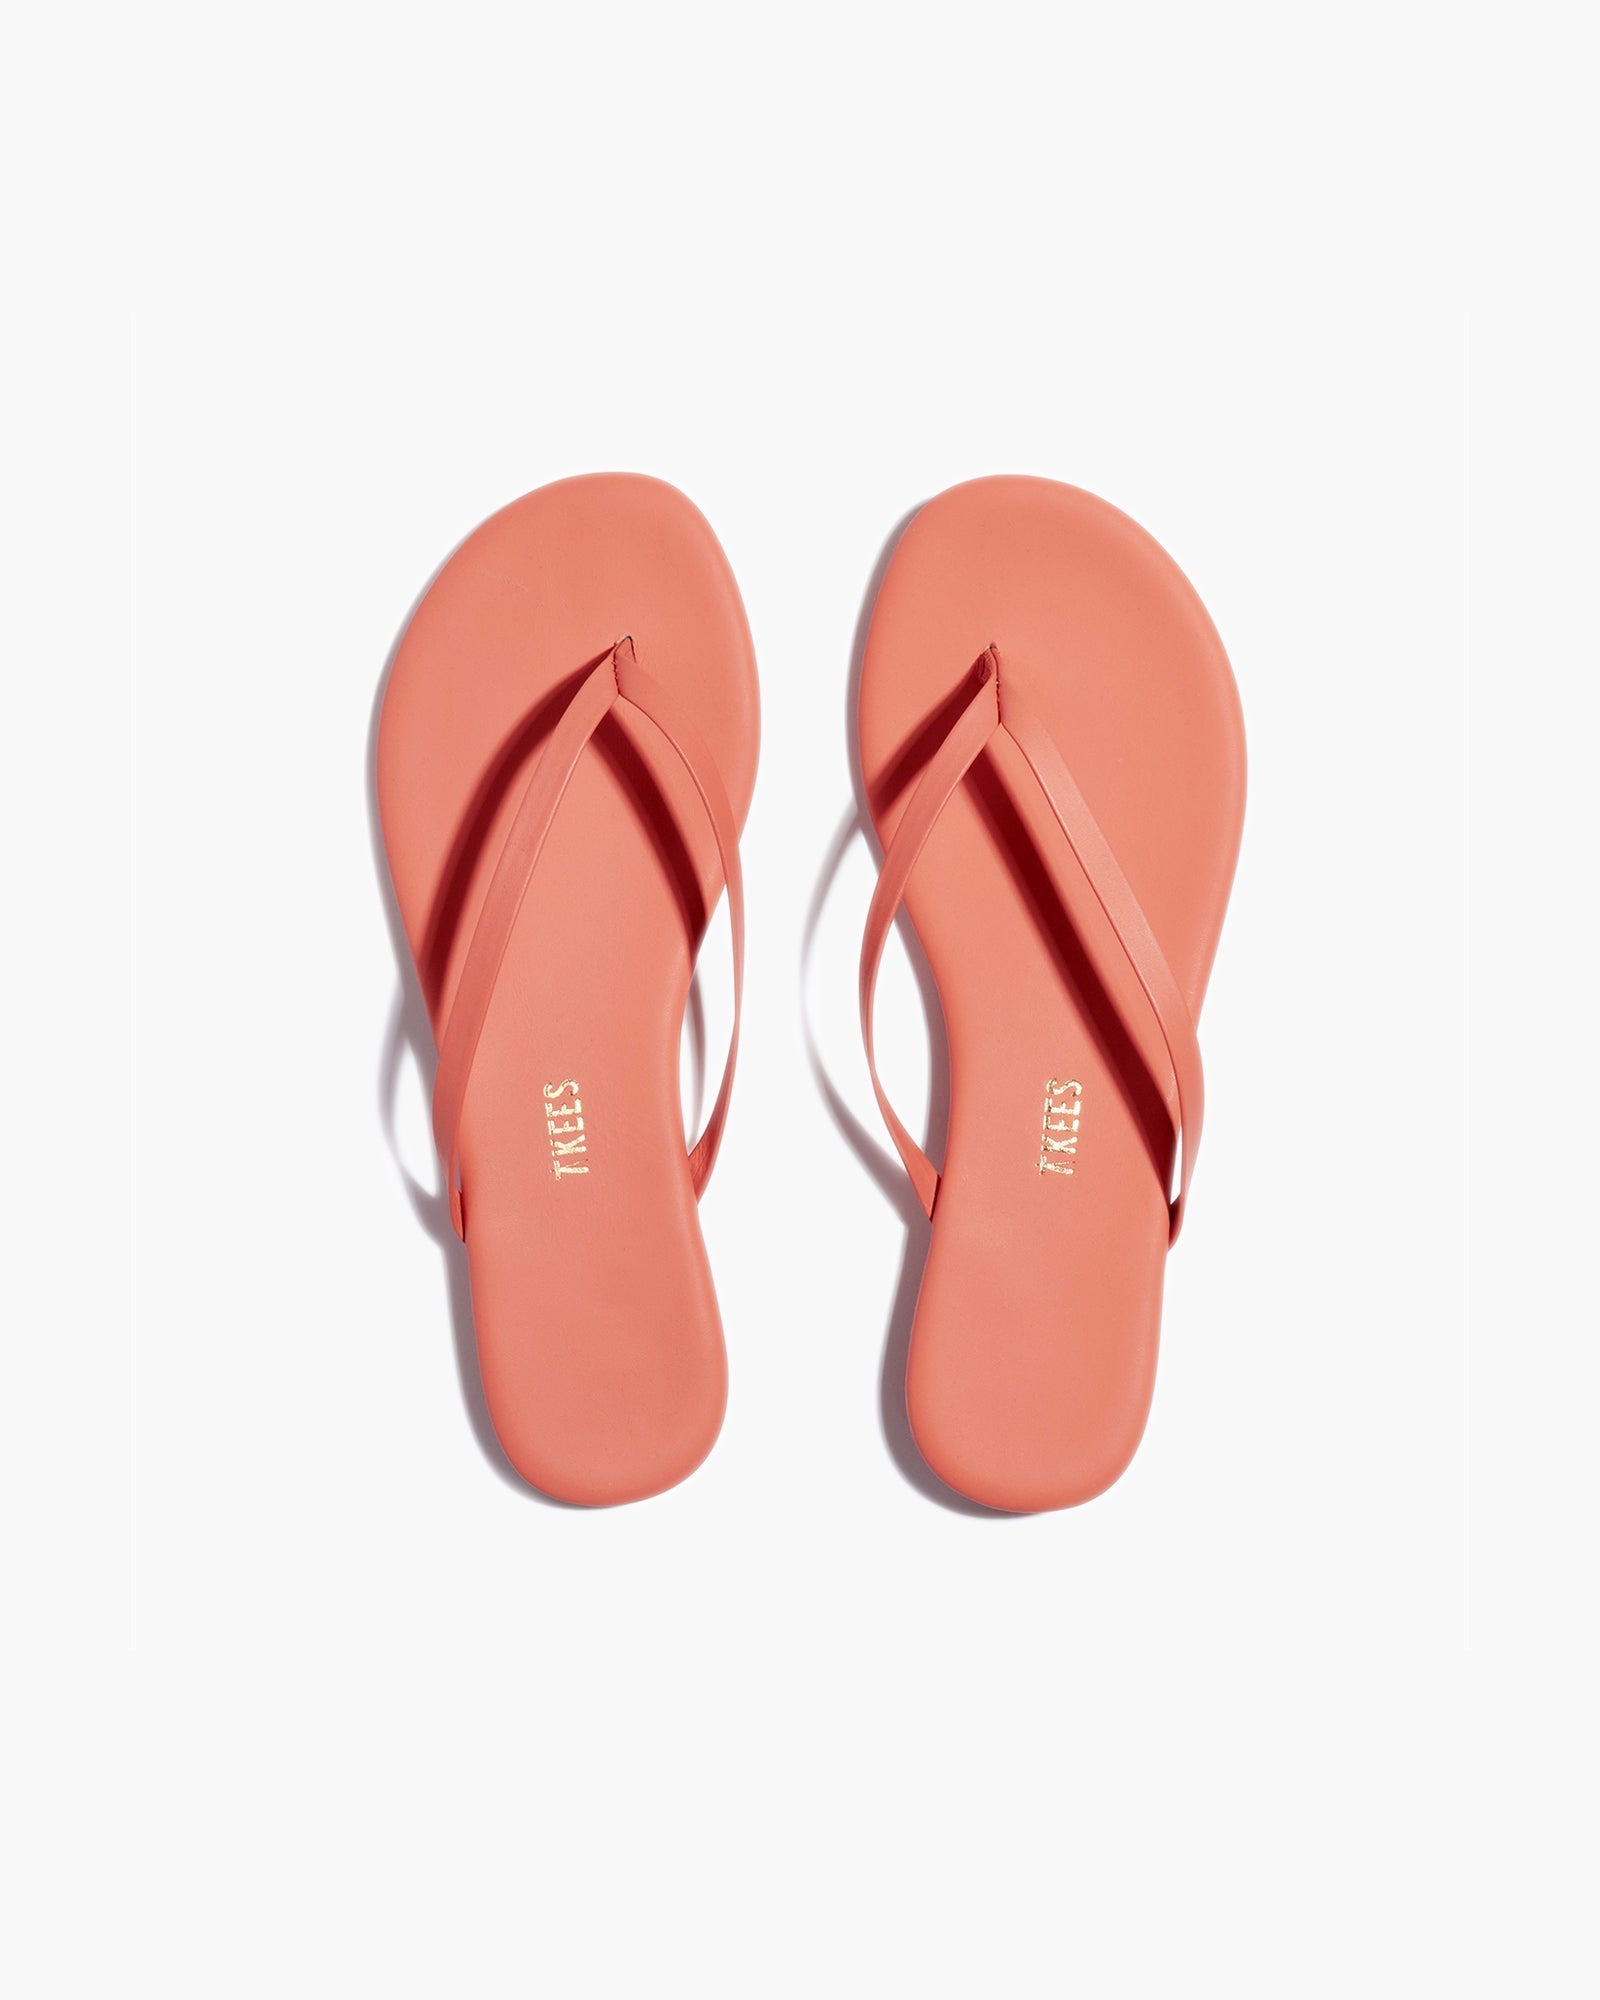 Orange Women's's's's's's's's's's's's's's's's's's's's's's TKEES Lily Pigments Flip Flops | BPMHIF709